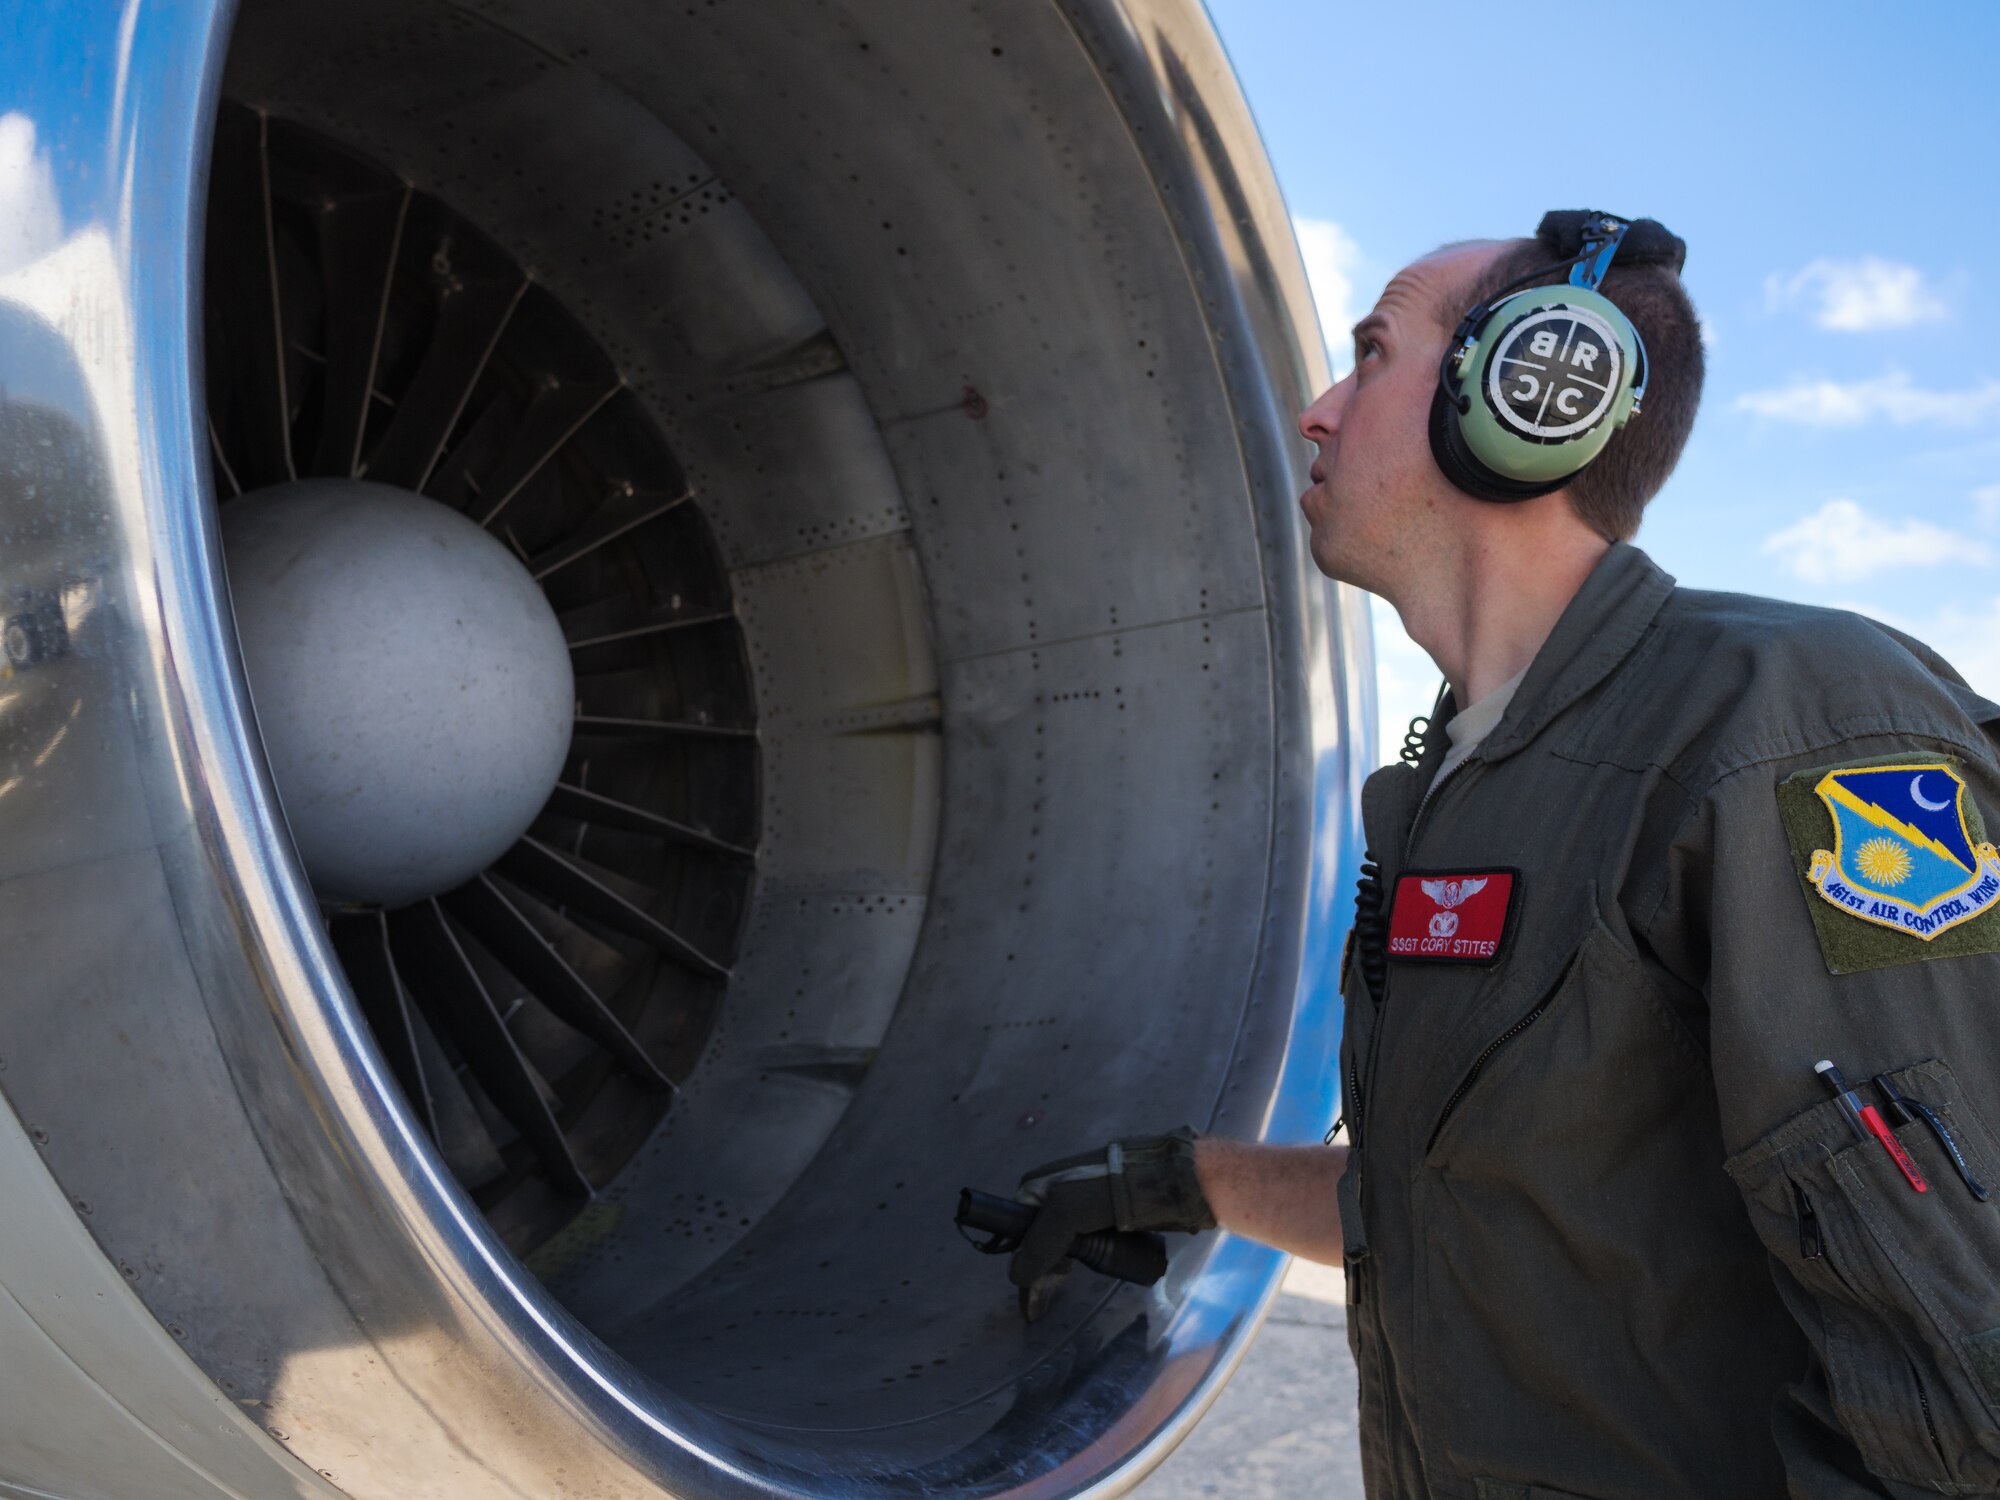 Photo shows a man with ear protection on looking into the parts of an aircraft.